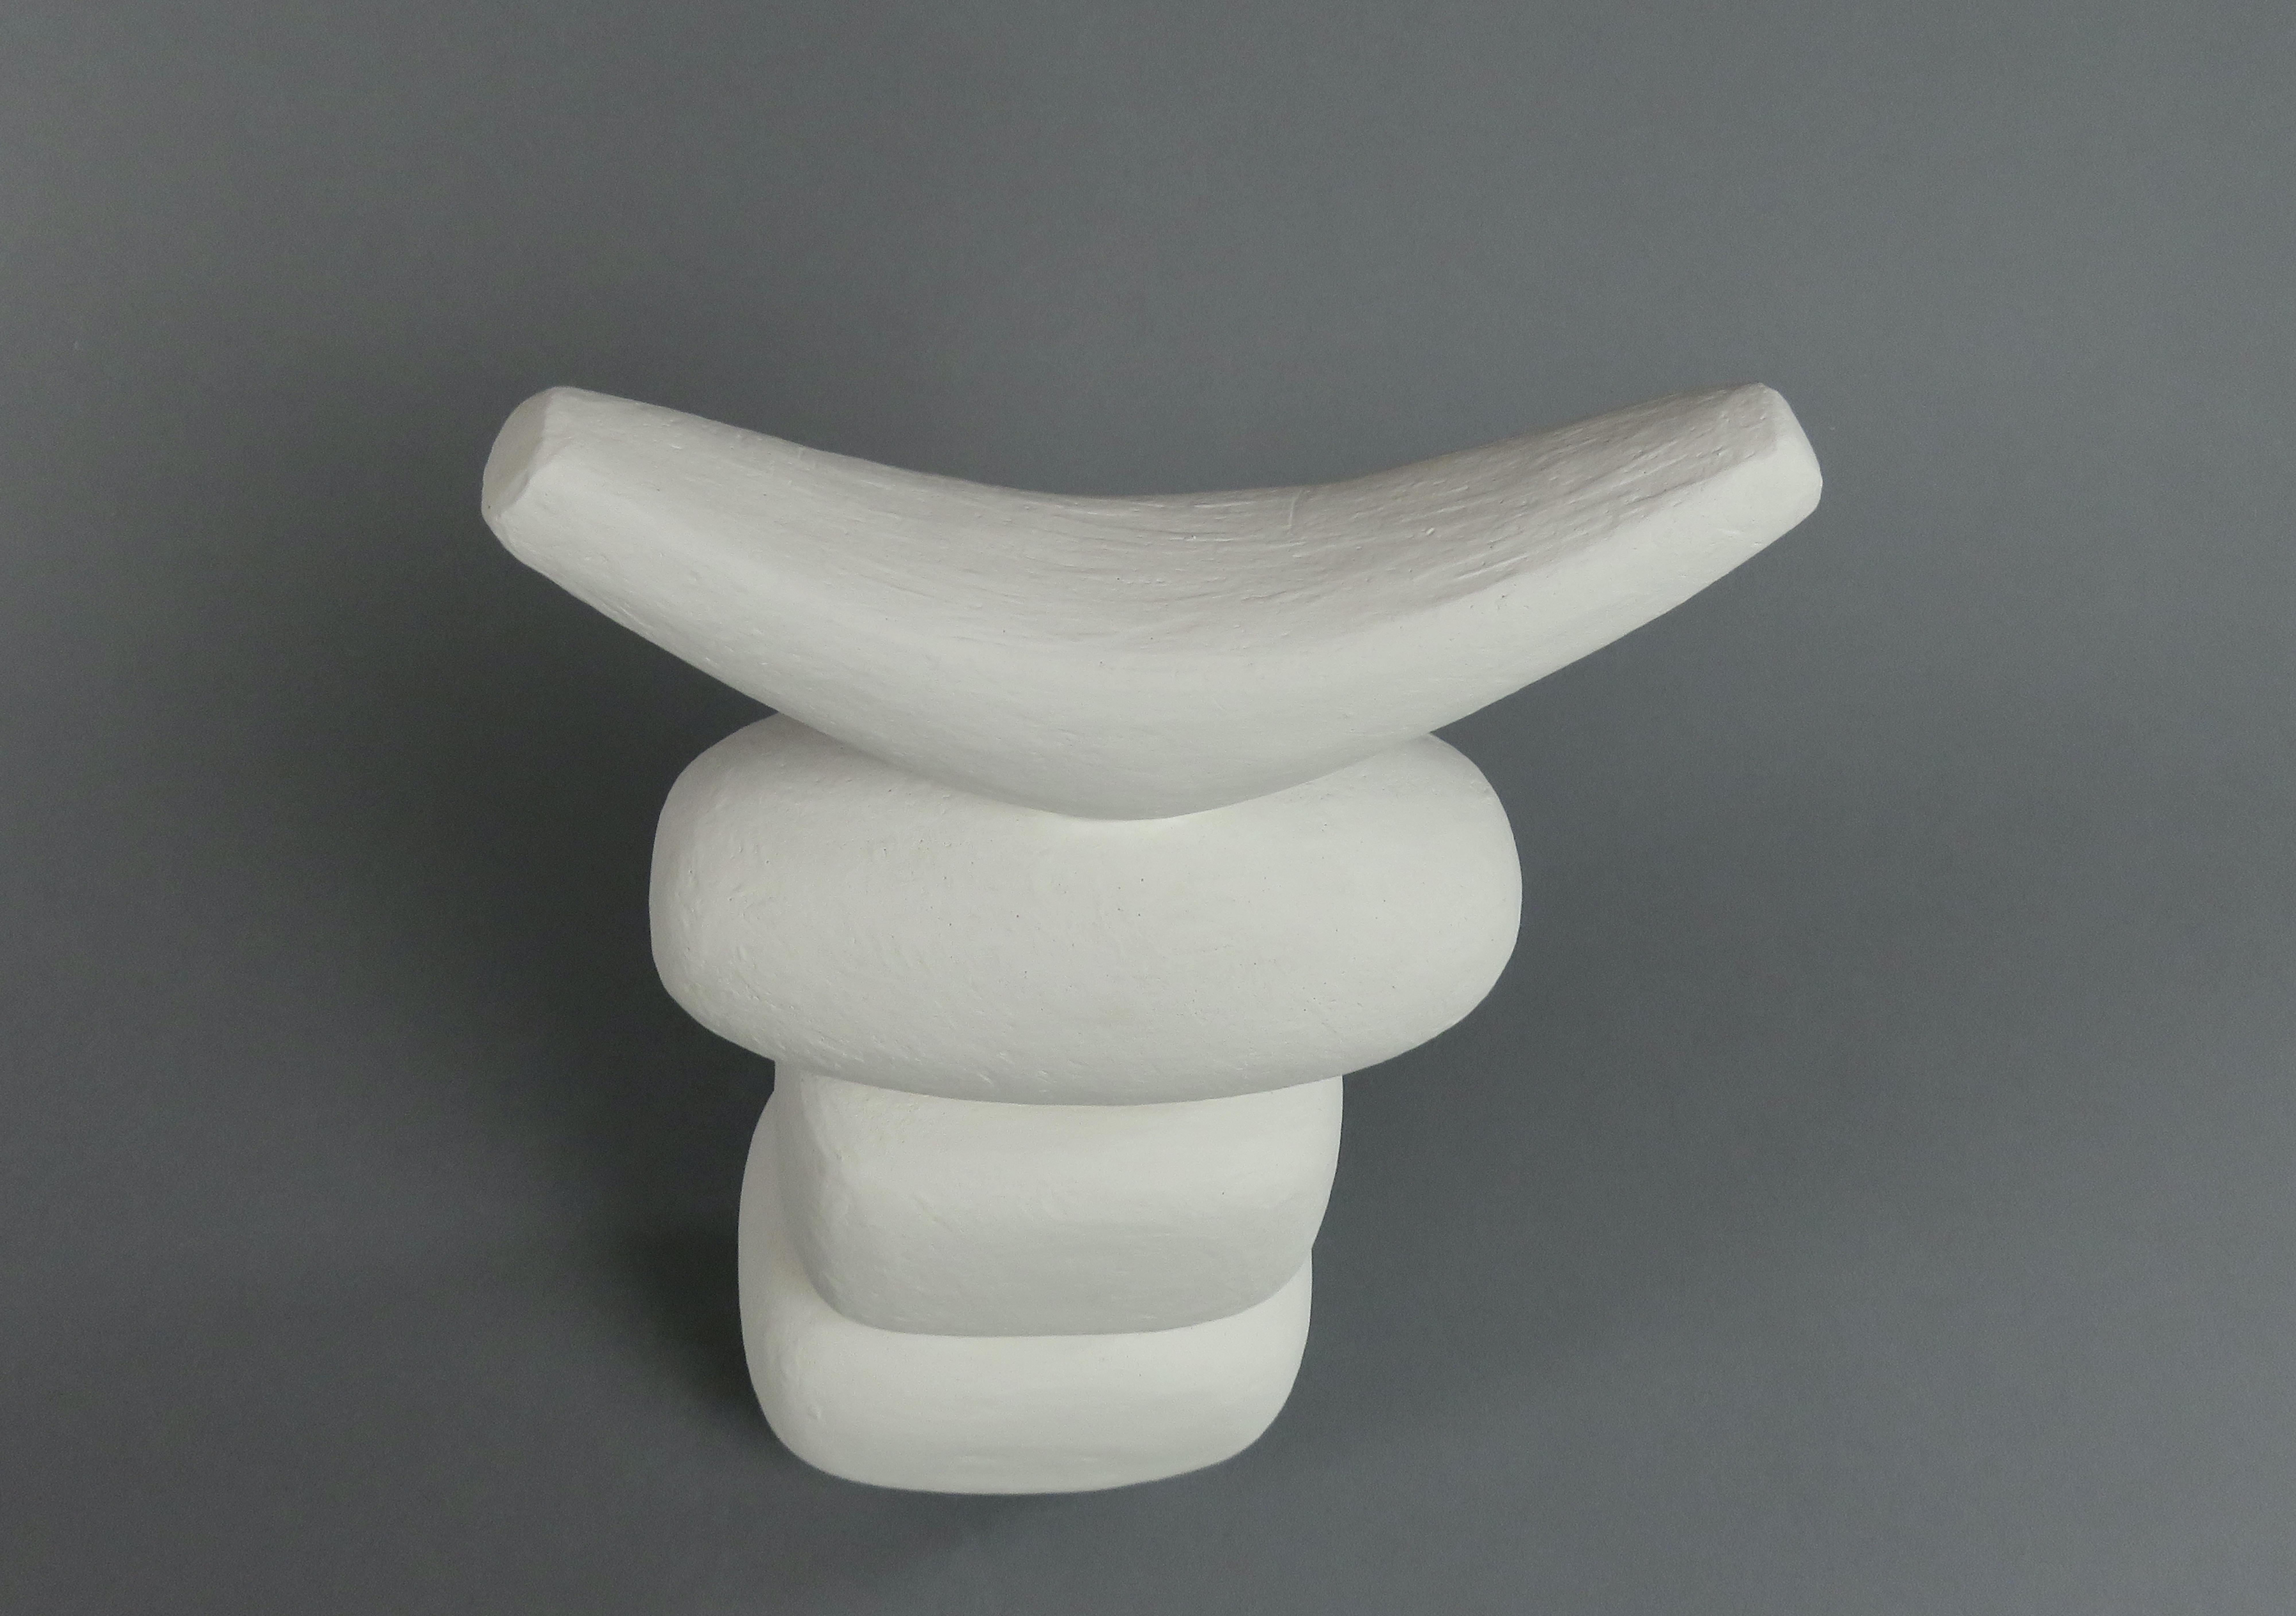 White Winged Crown, 4 Part Ceramic TOTEM, Hand Built Sculpture by H. Starcevic In New Condition For Sale In New York, NY